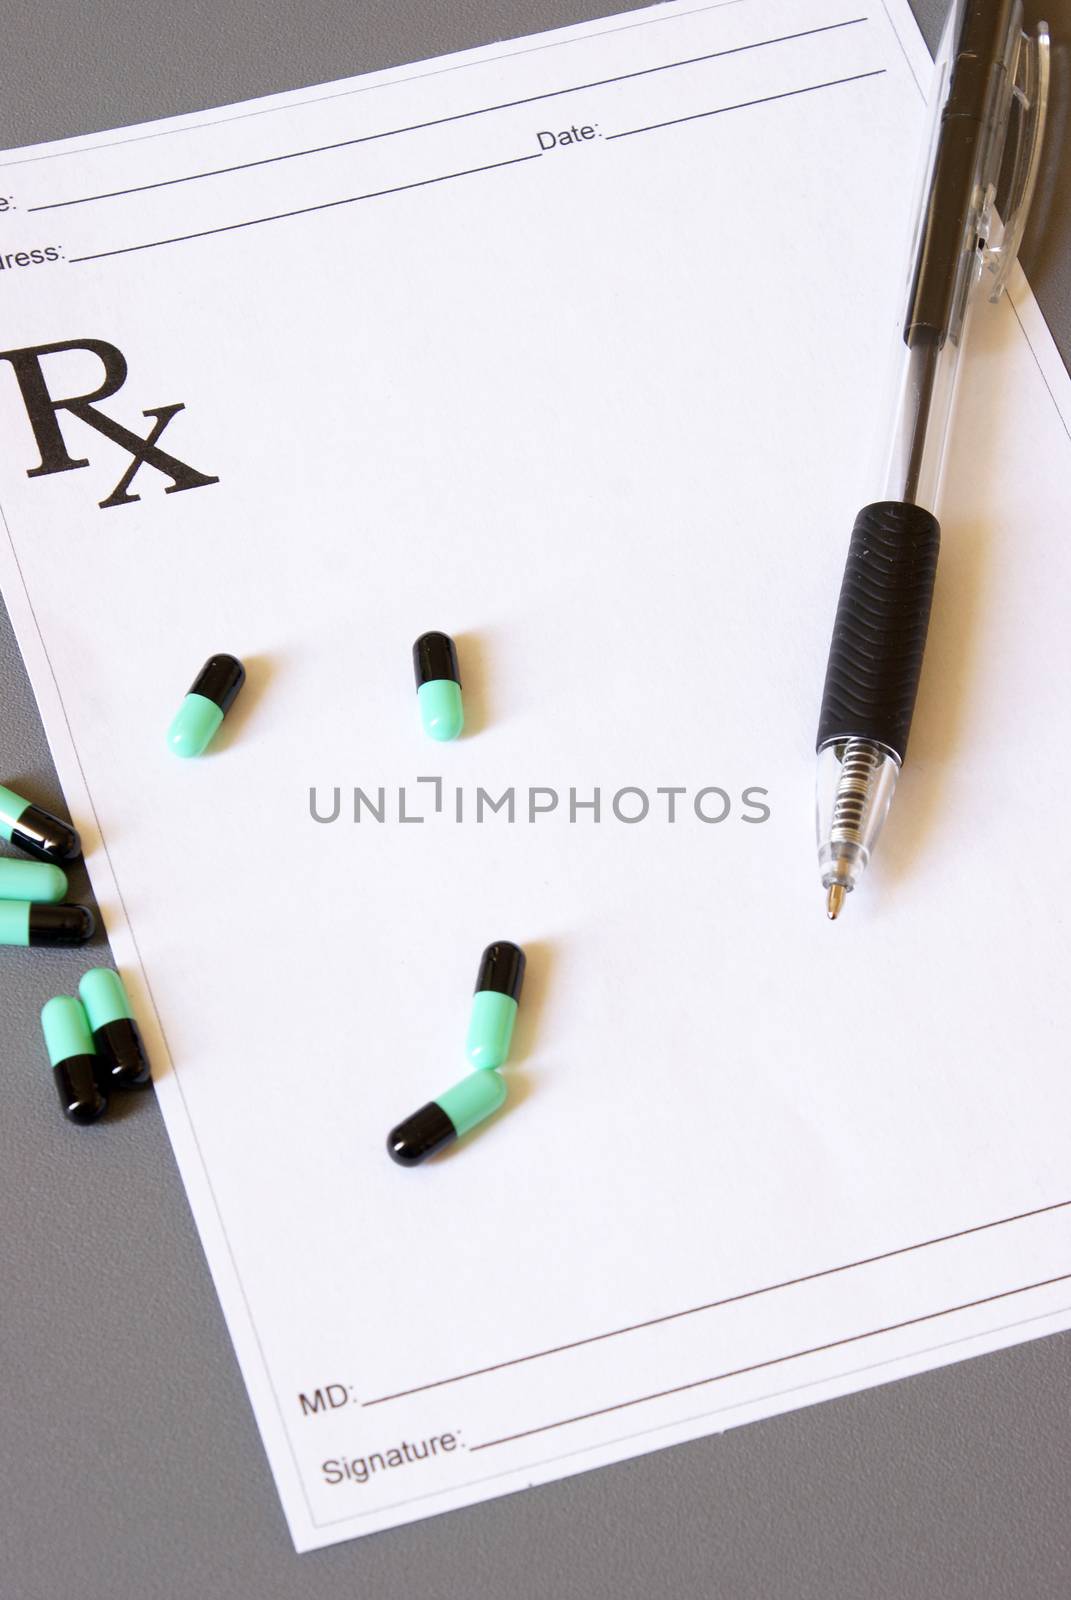 A medical script pad without anything wrote on it.